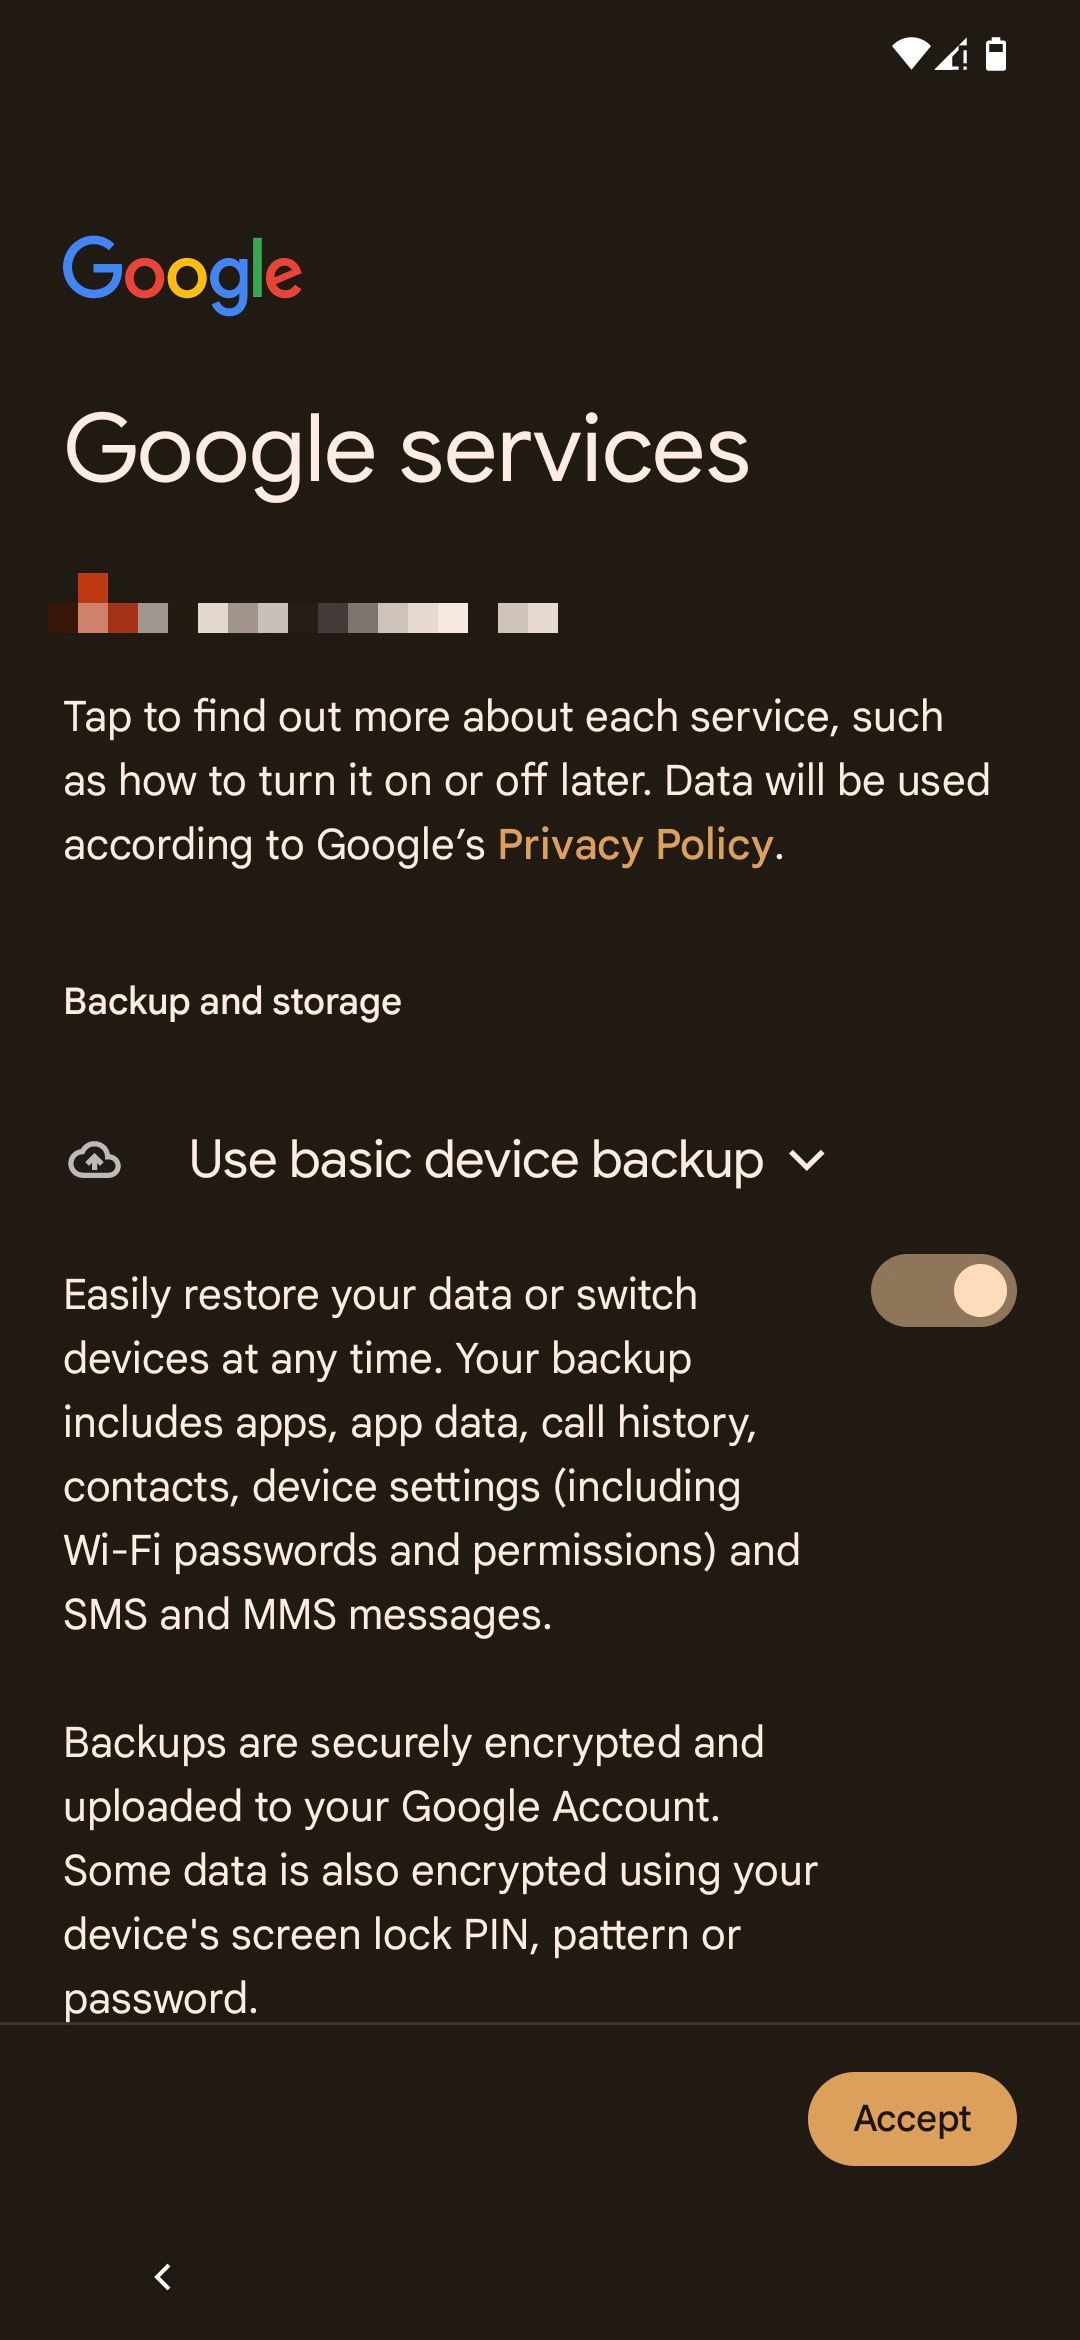 Accepting terms and conditions of Google services